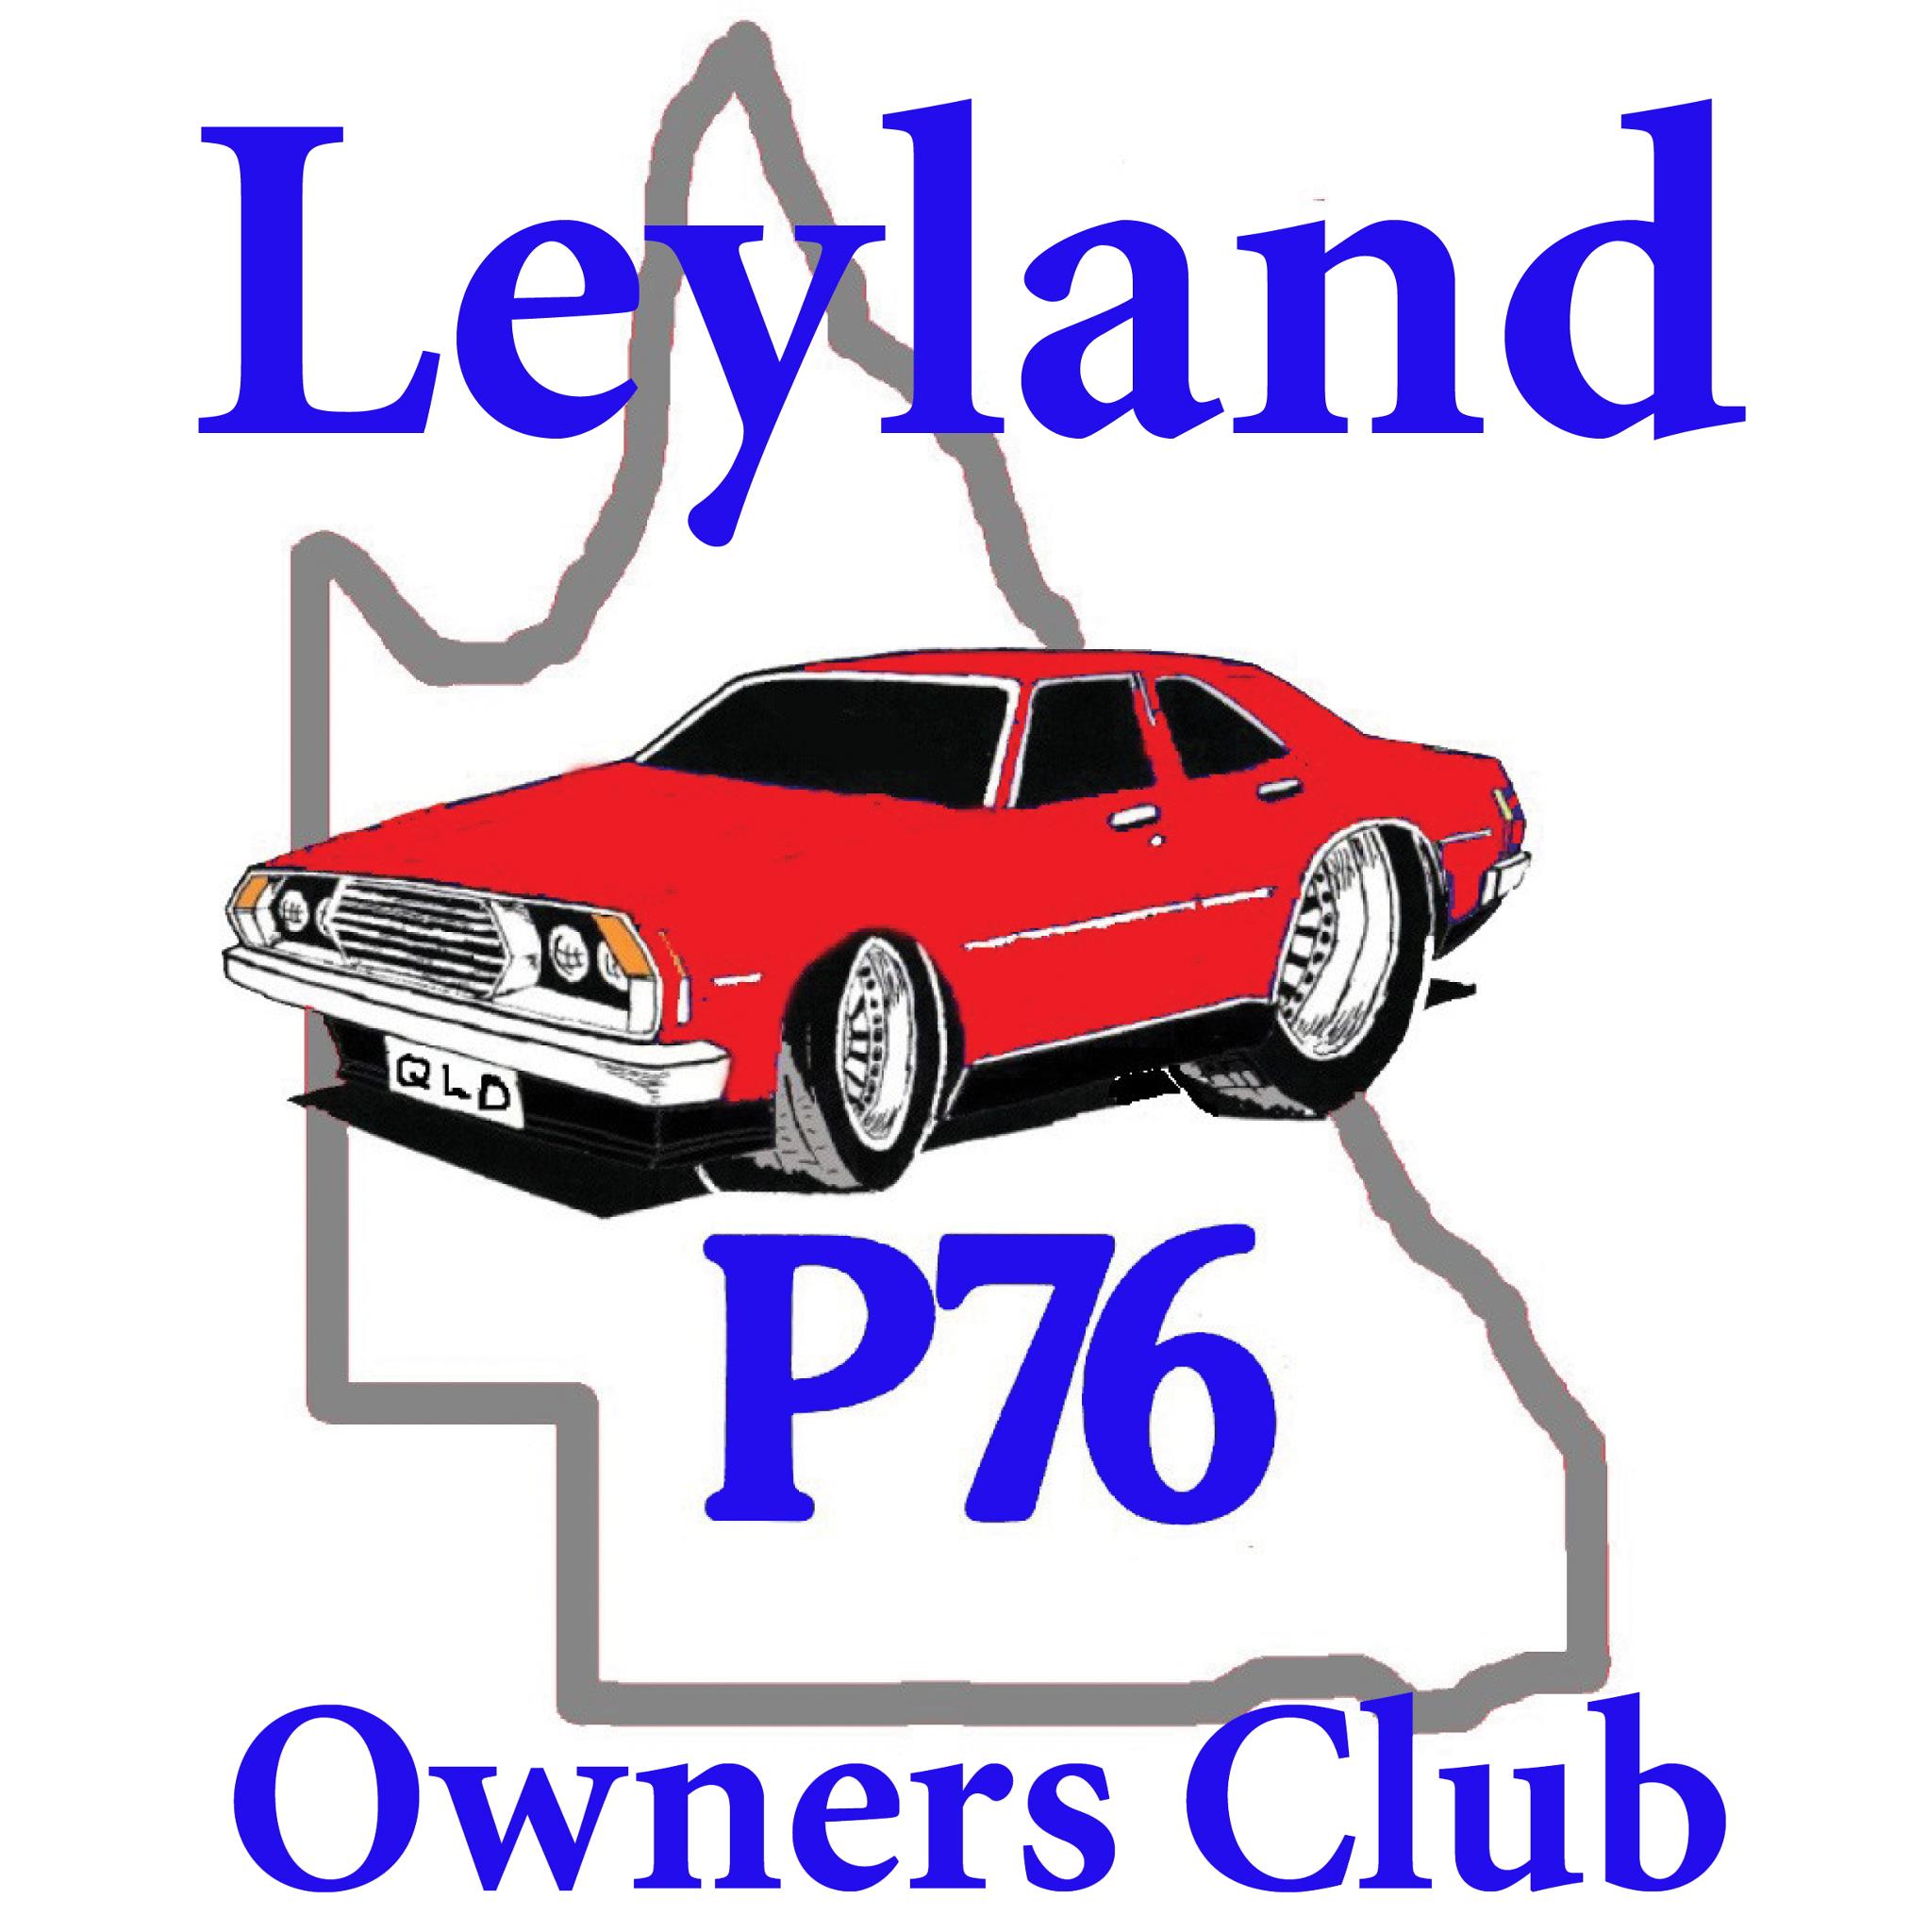 Leyland P76 Owners of Queensland Club